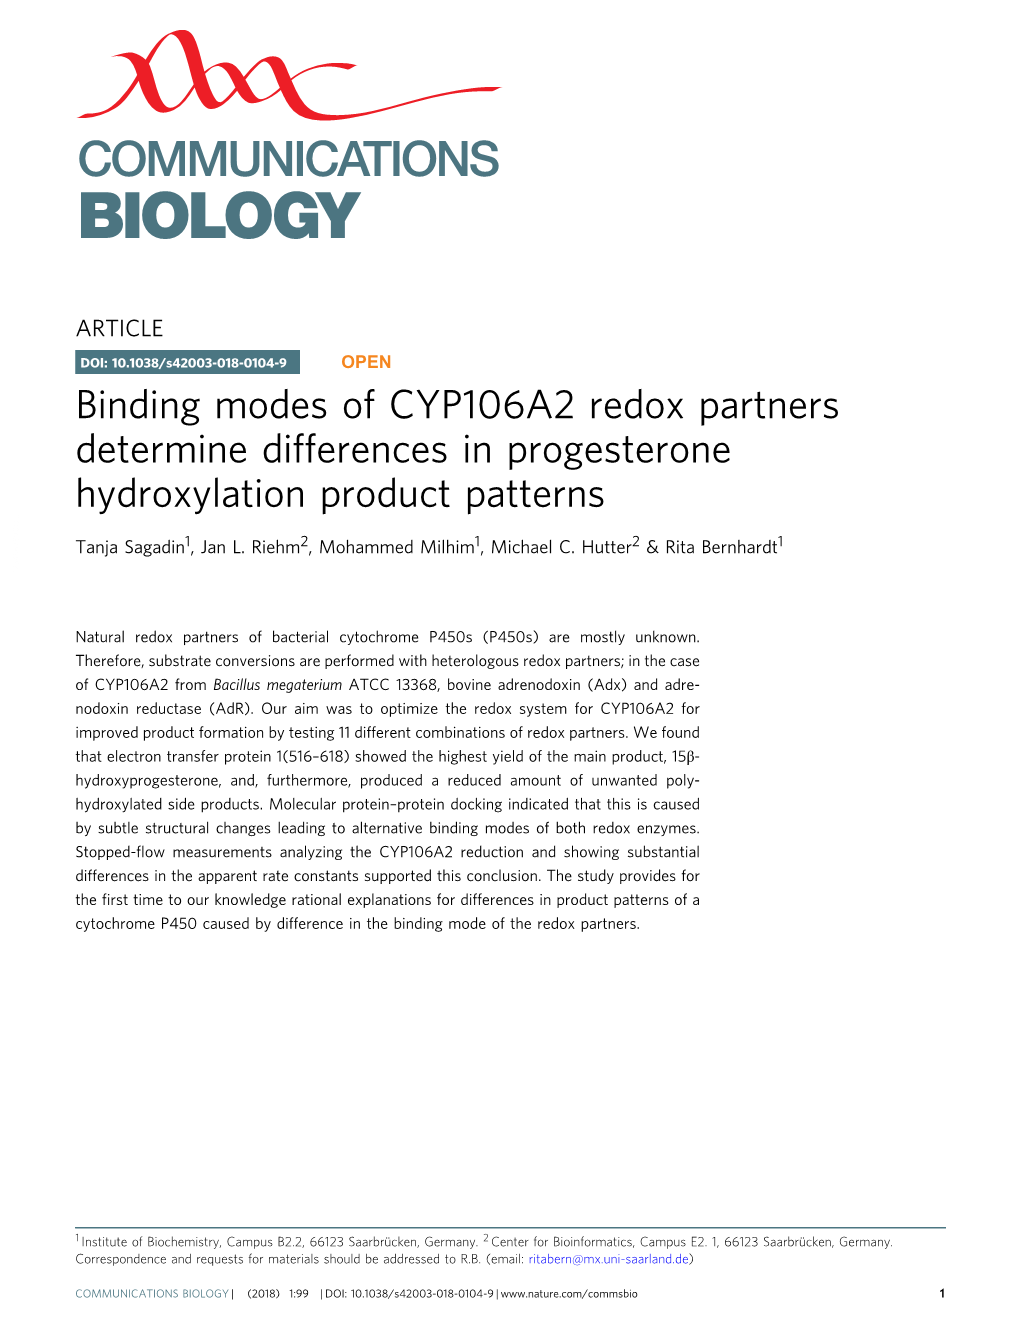 Binding Modes of CYP106A2 Redox Partners Determine Differences in Progesterone Hydroxylation Product Patterns